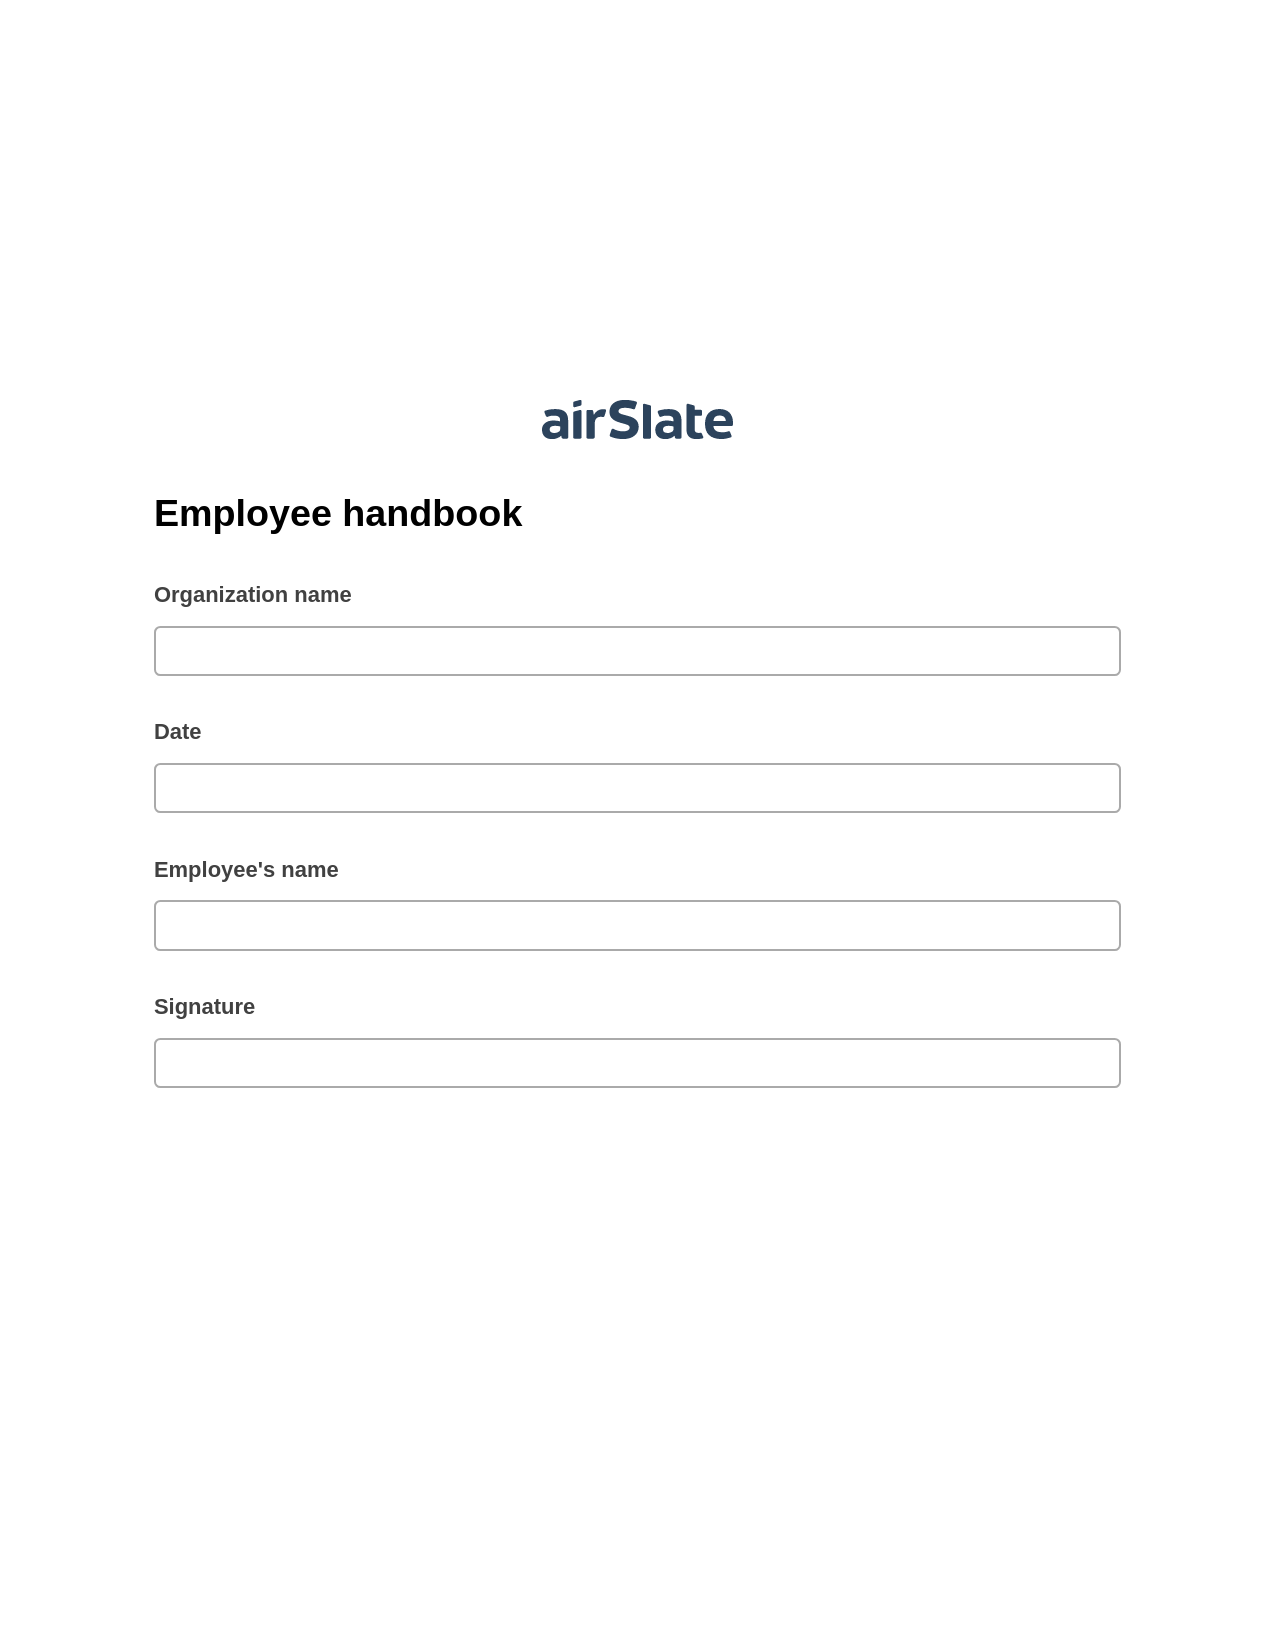 Employee handbook Pre-fill from Salesforce Record Bot, Send a Slate to MS Dynamics 365 Contact Bot, Export to Smartsheet